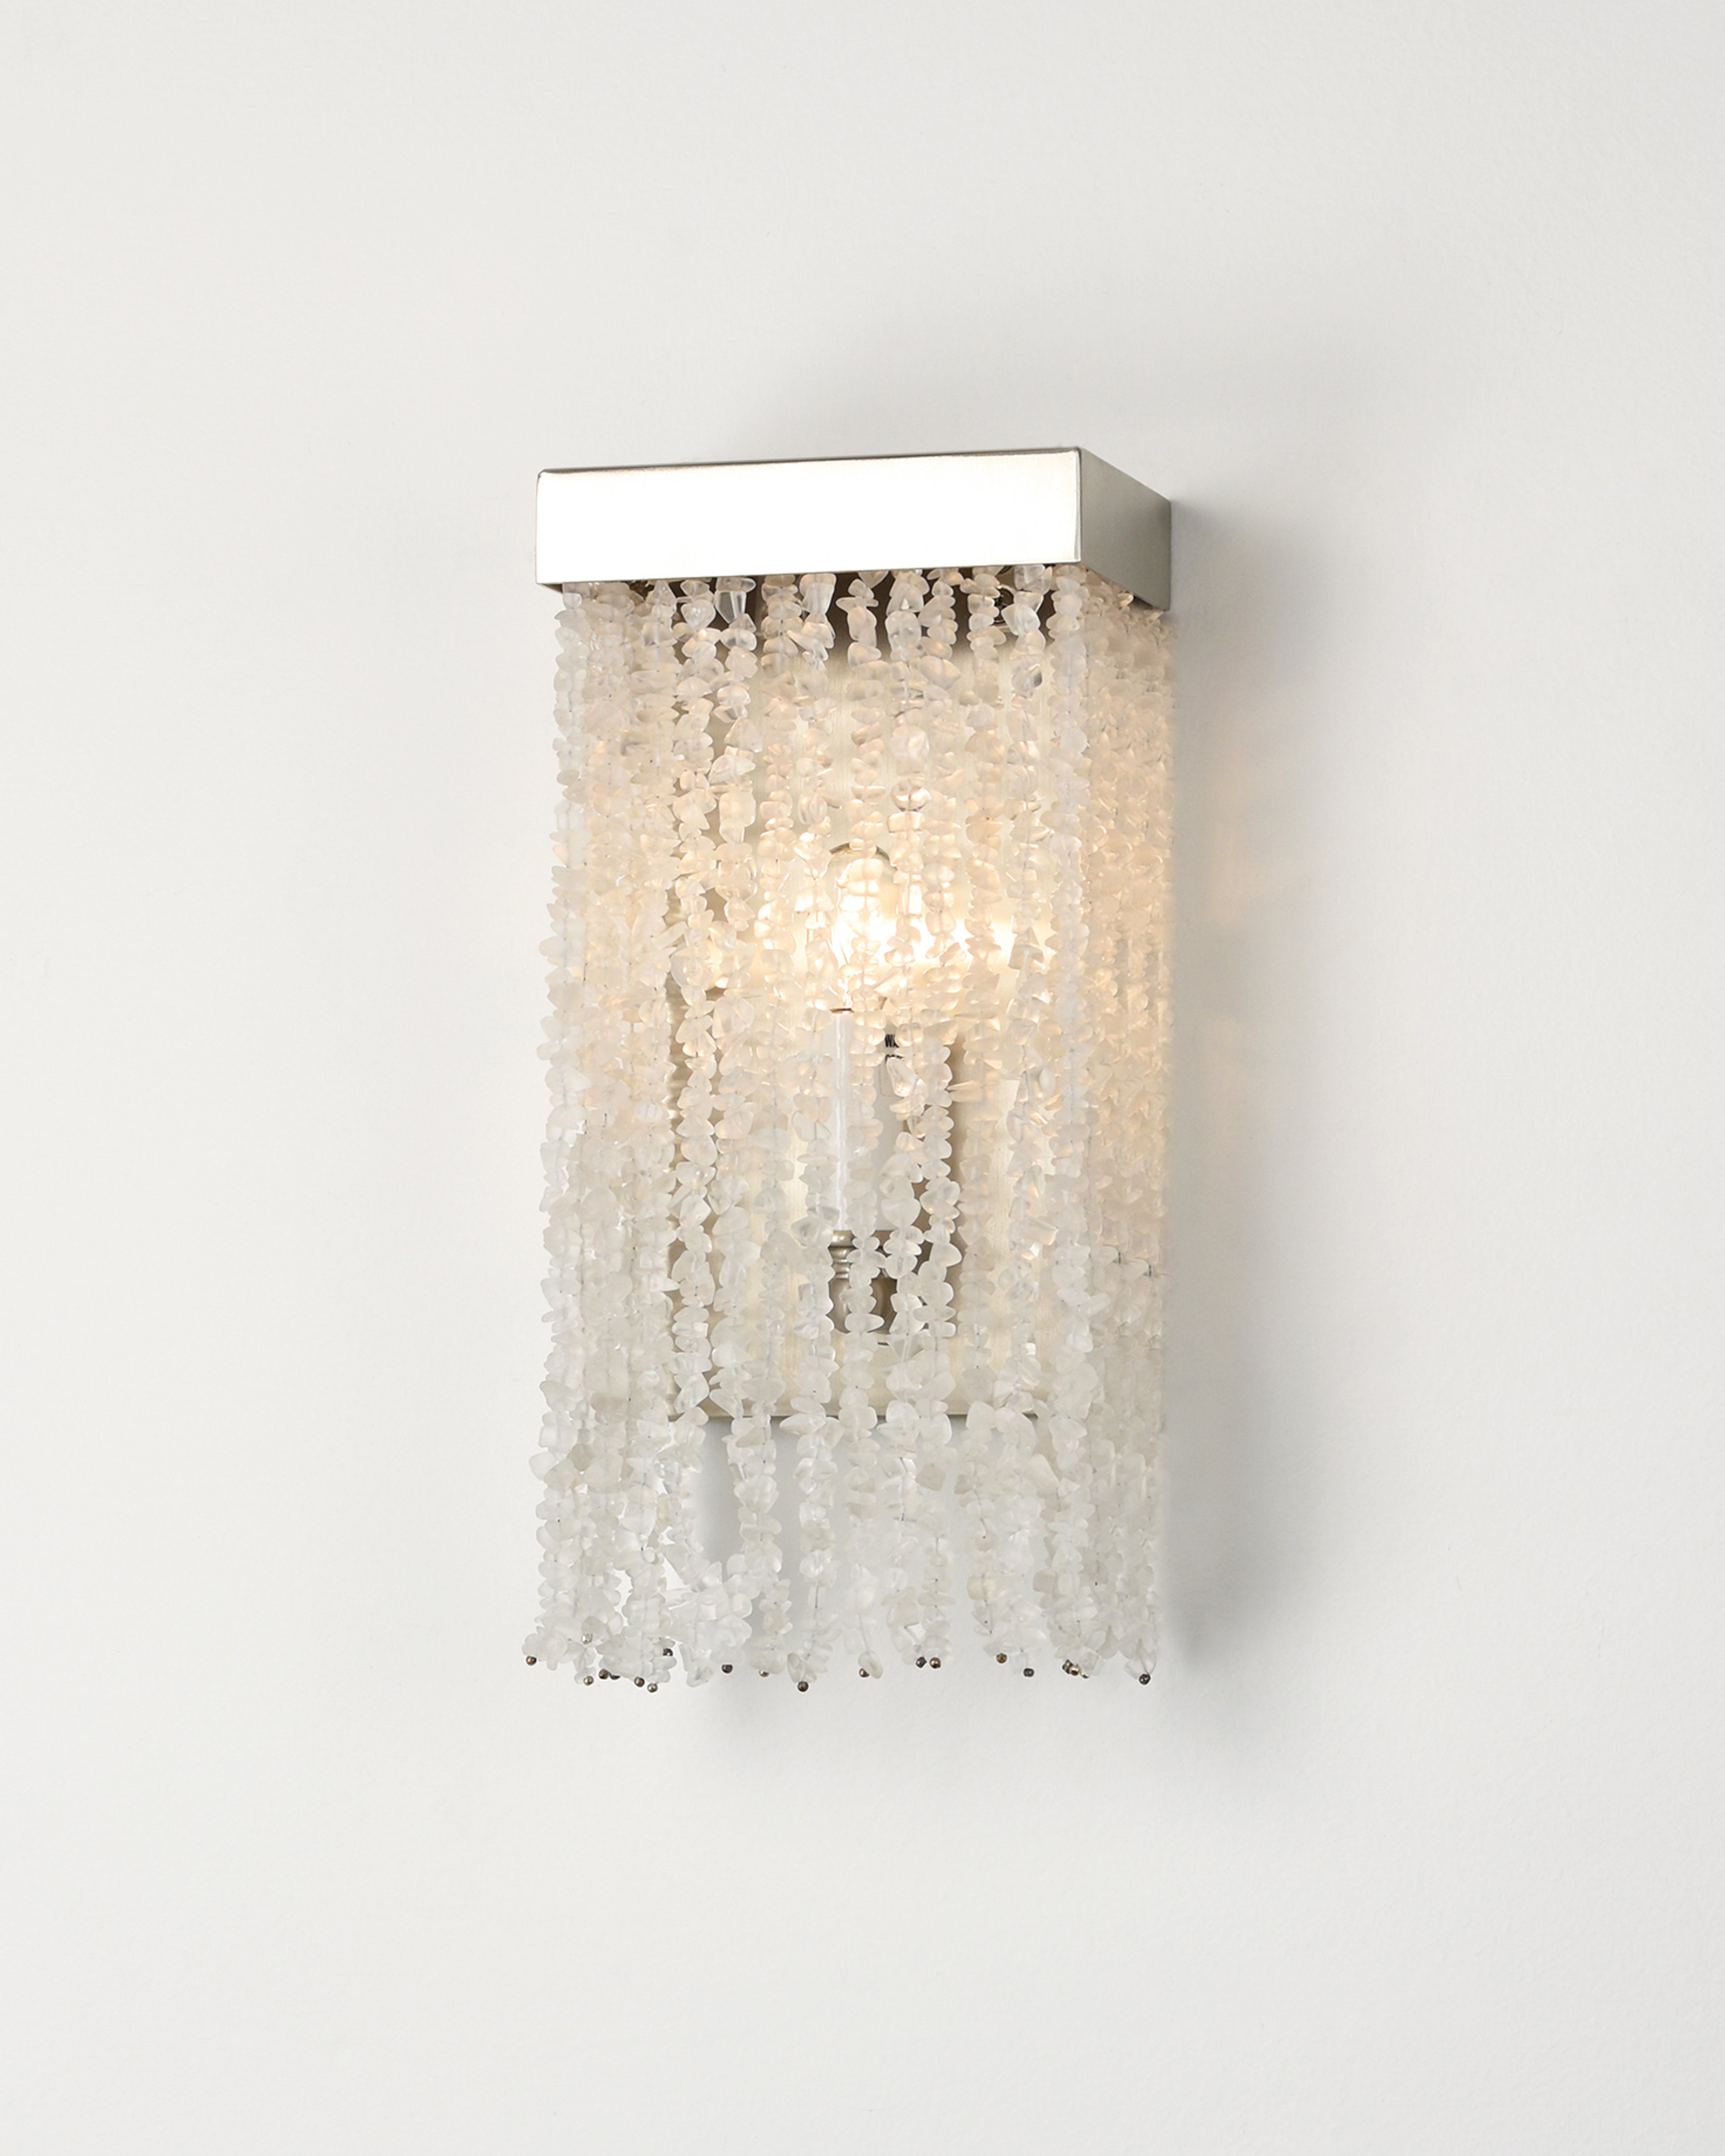 10 Inch Sconce in Satin Nickel with Frosted Rock Crystal Chips